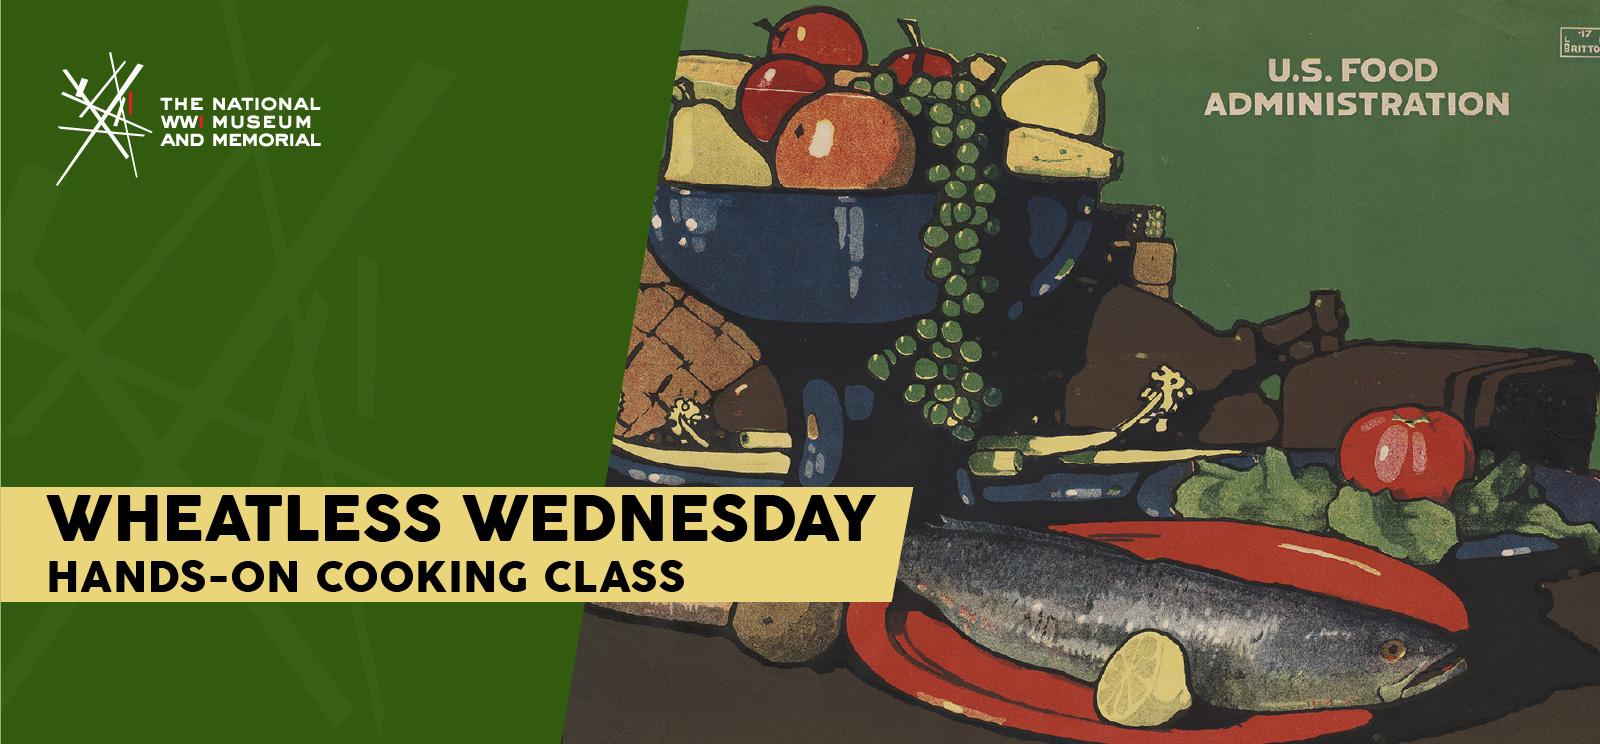 Image: Poster painting of plates and bowls of fruit, vegetables, fish and meats gathered on a table. Text: 'Wheatless Wednesday / Hands-on Cooking Class'